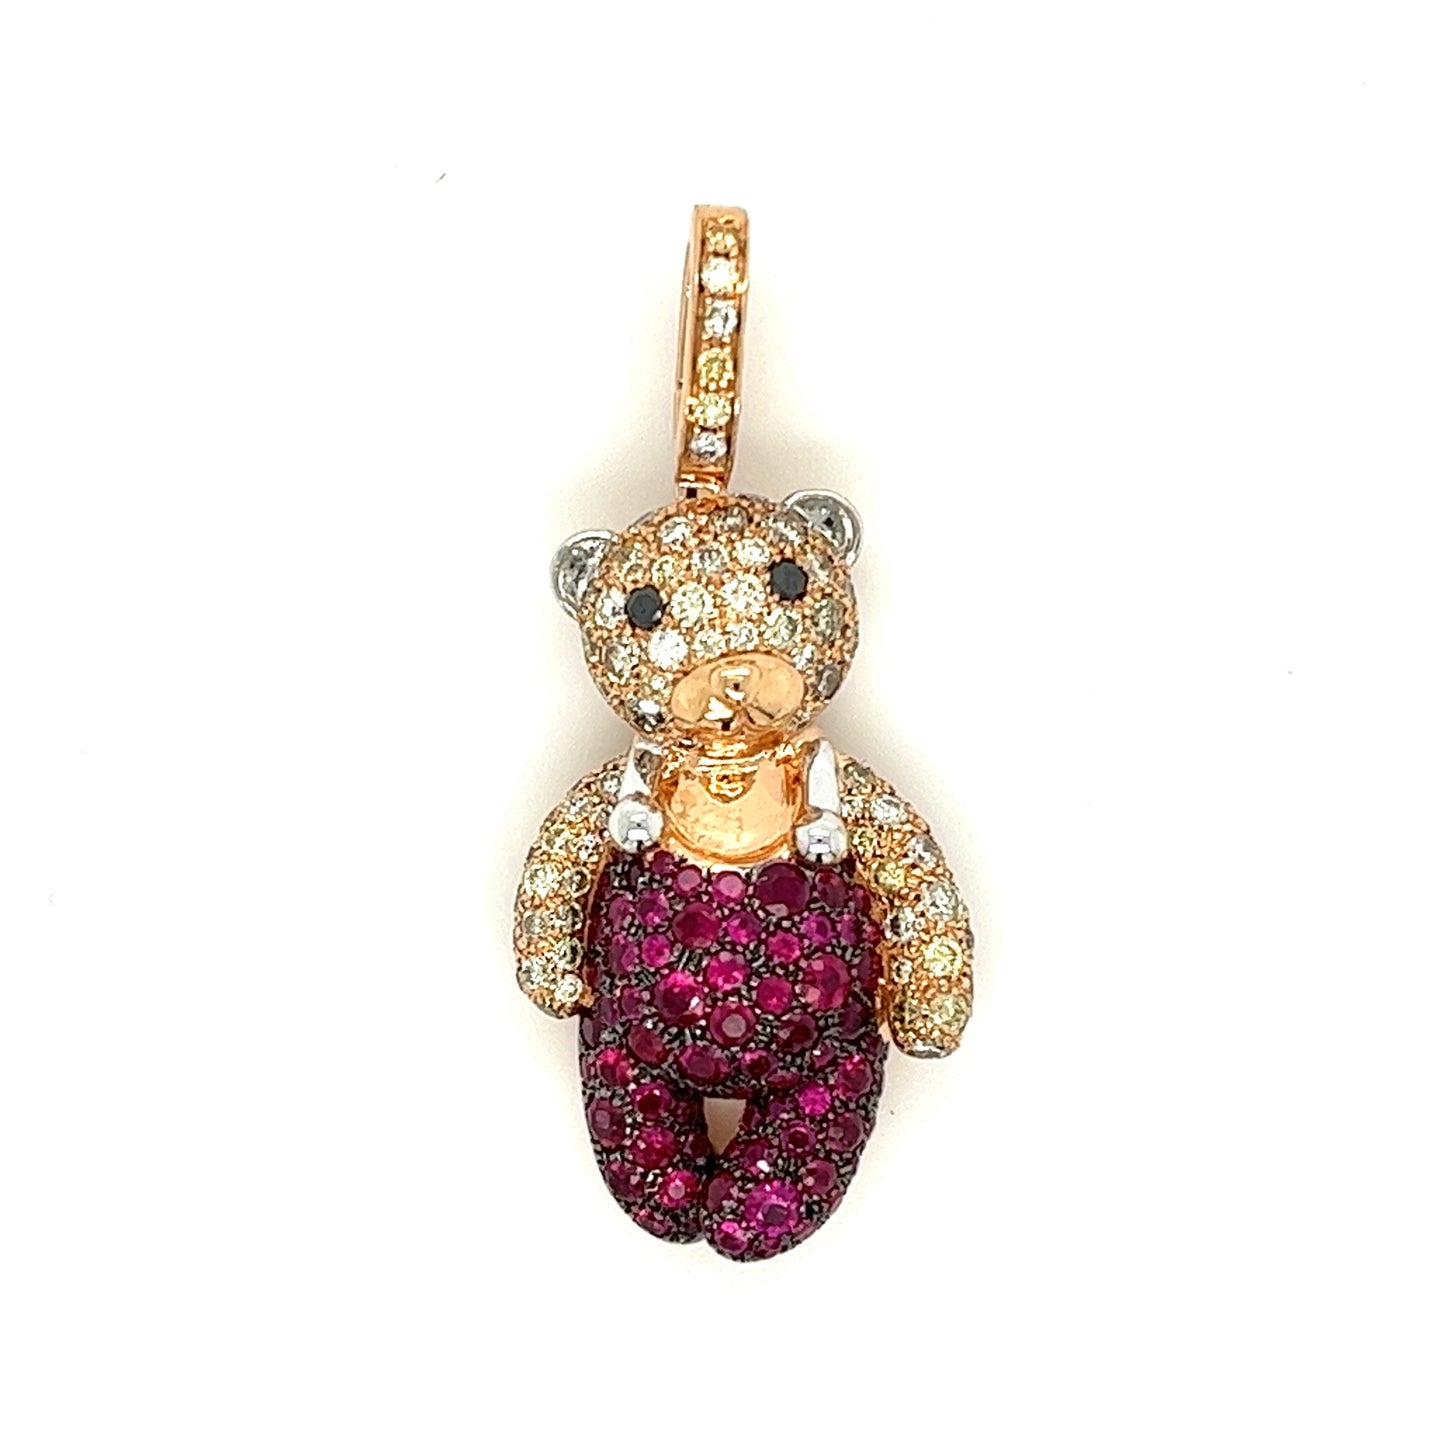 18K Gold Bear Necklace with Diamonds and Rubies